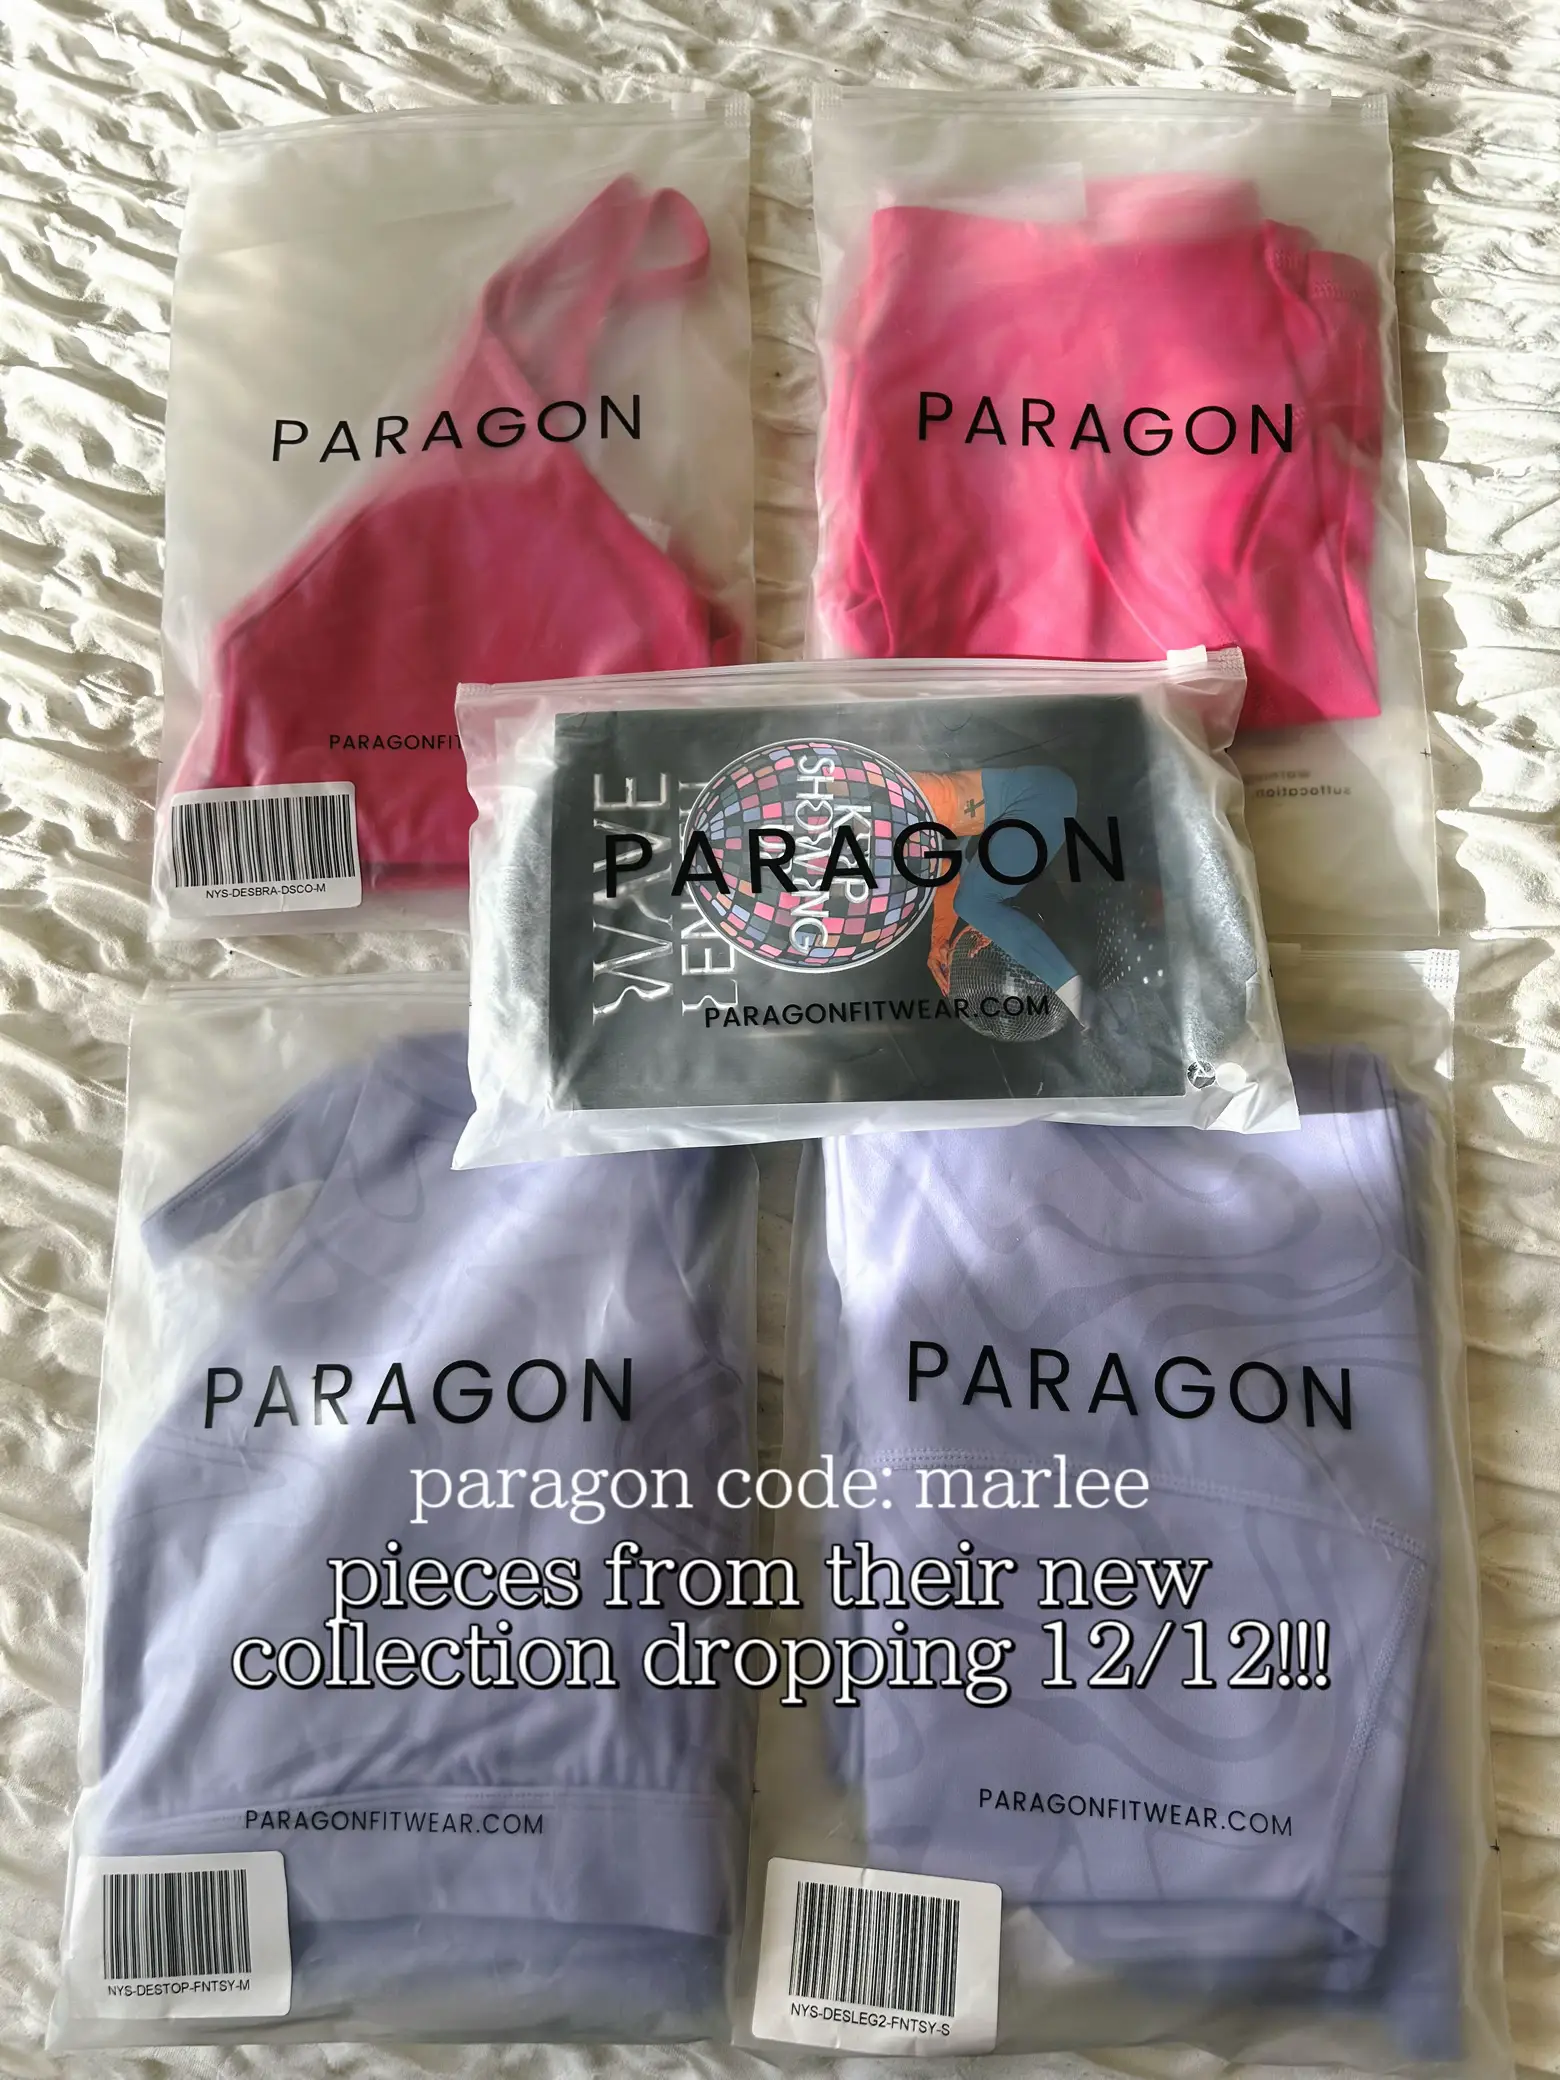 10% Off Paragon Fitwear Coupons, Promo Codes, Deals